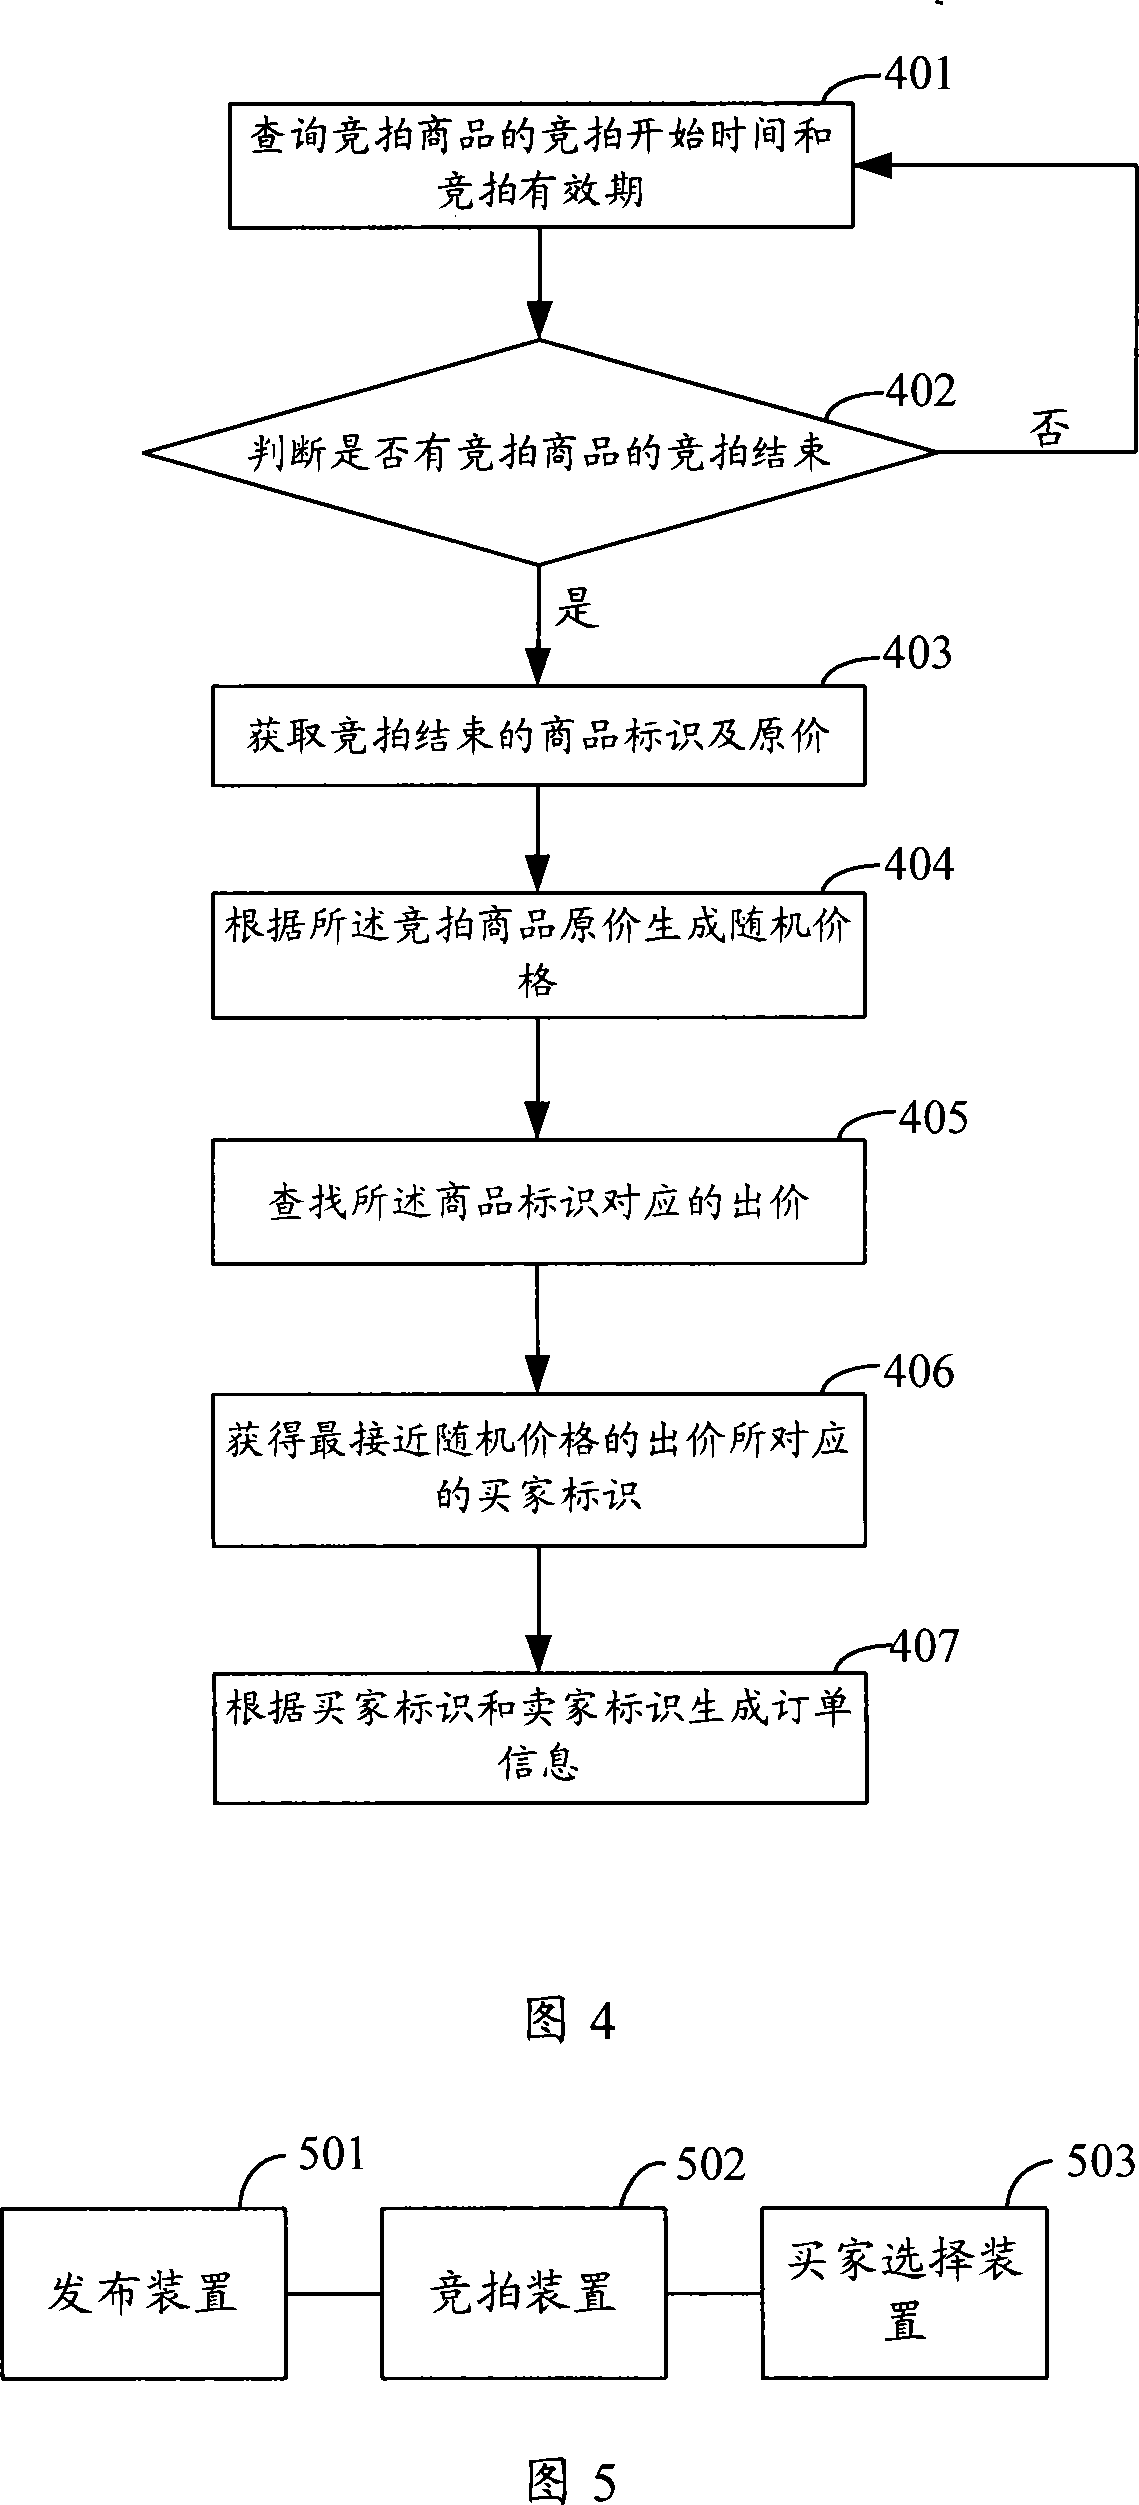 Electronic commerce auction method and device